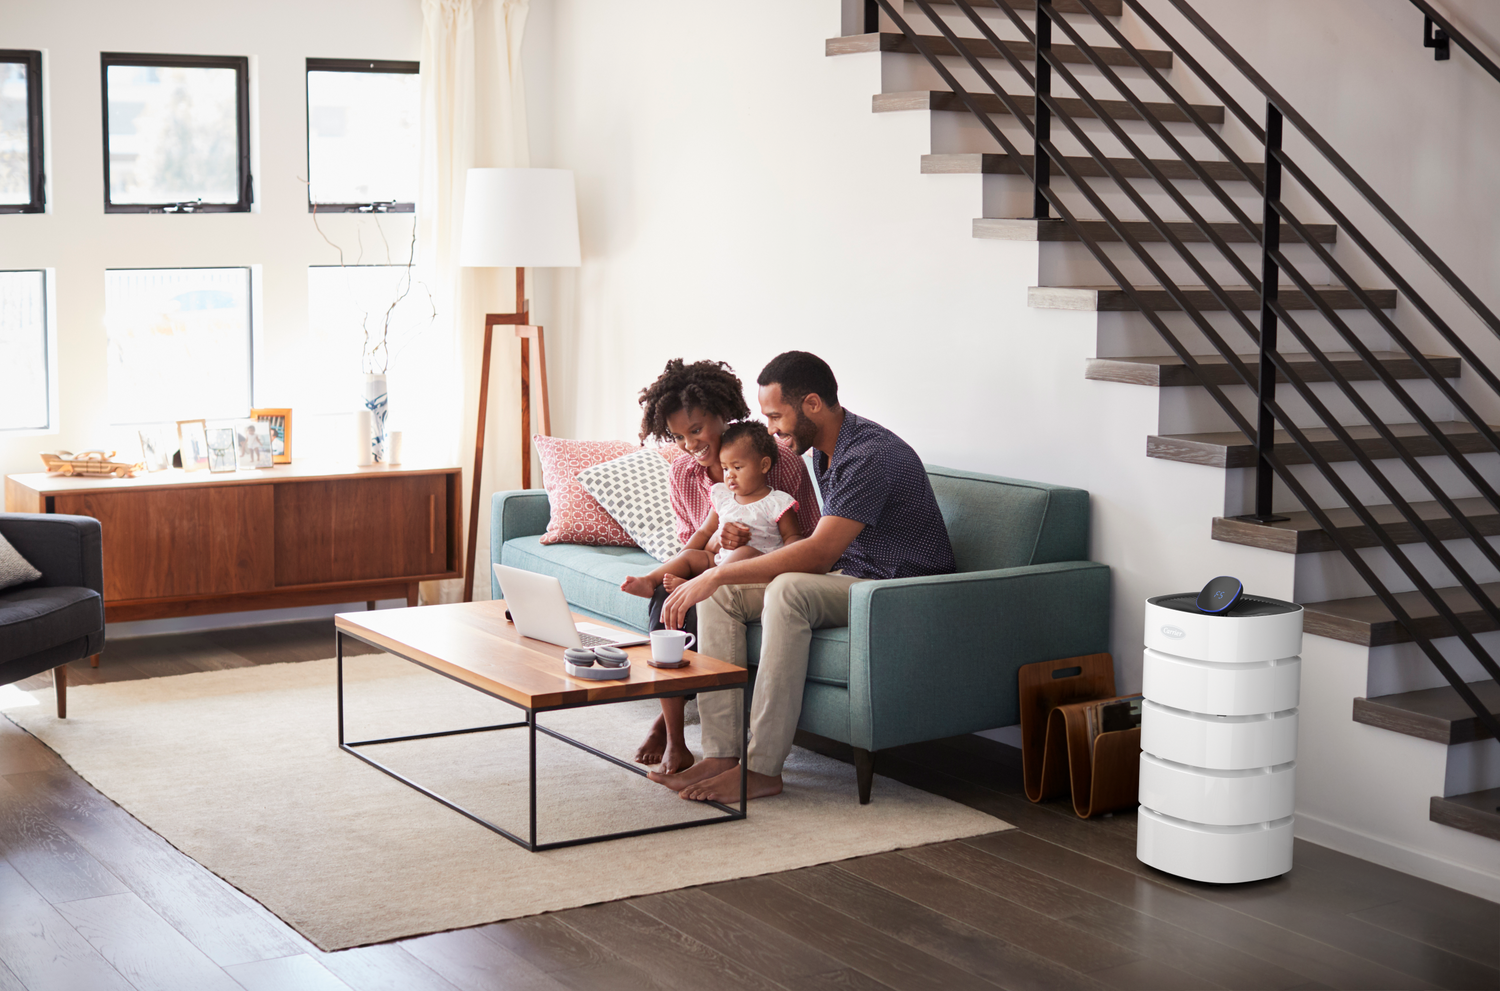 Parents and their child in their living room with the Carrier Air Purifier on